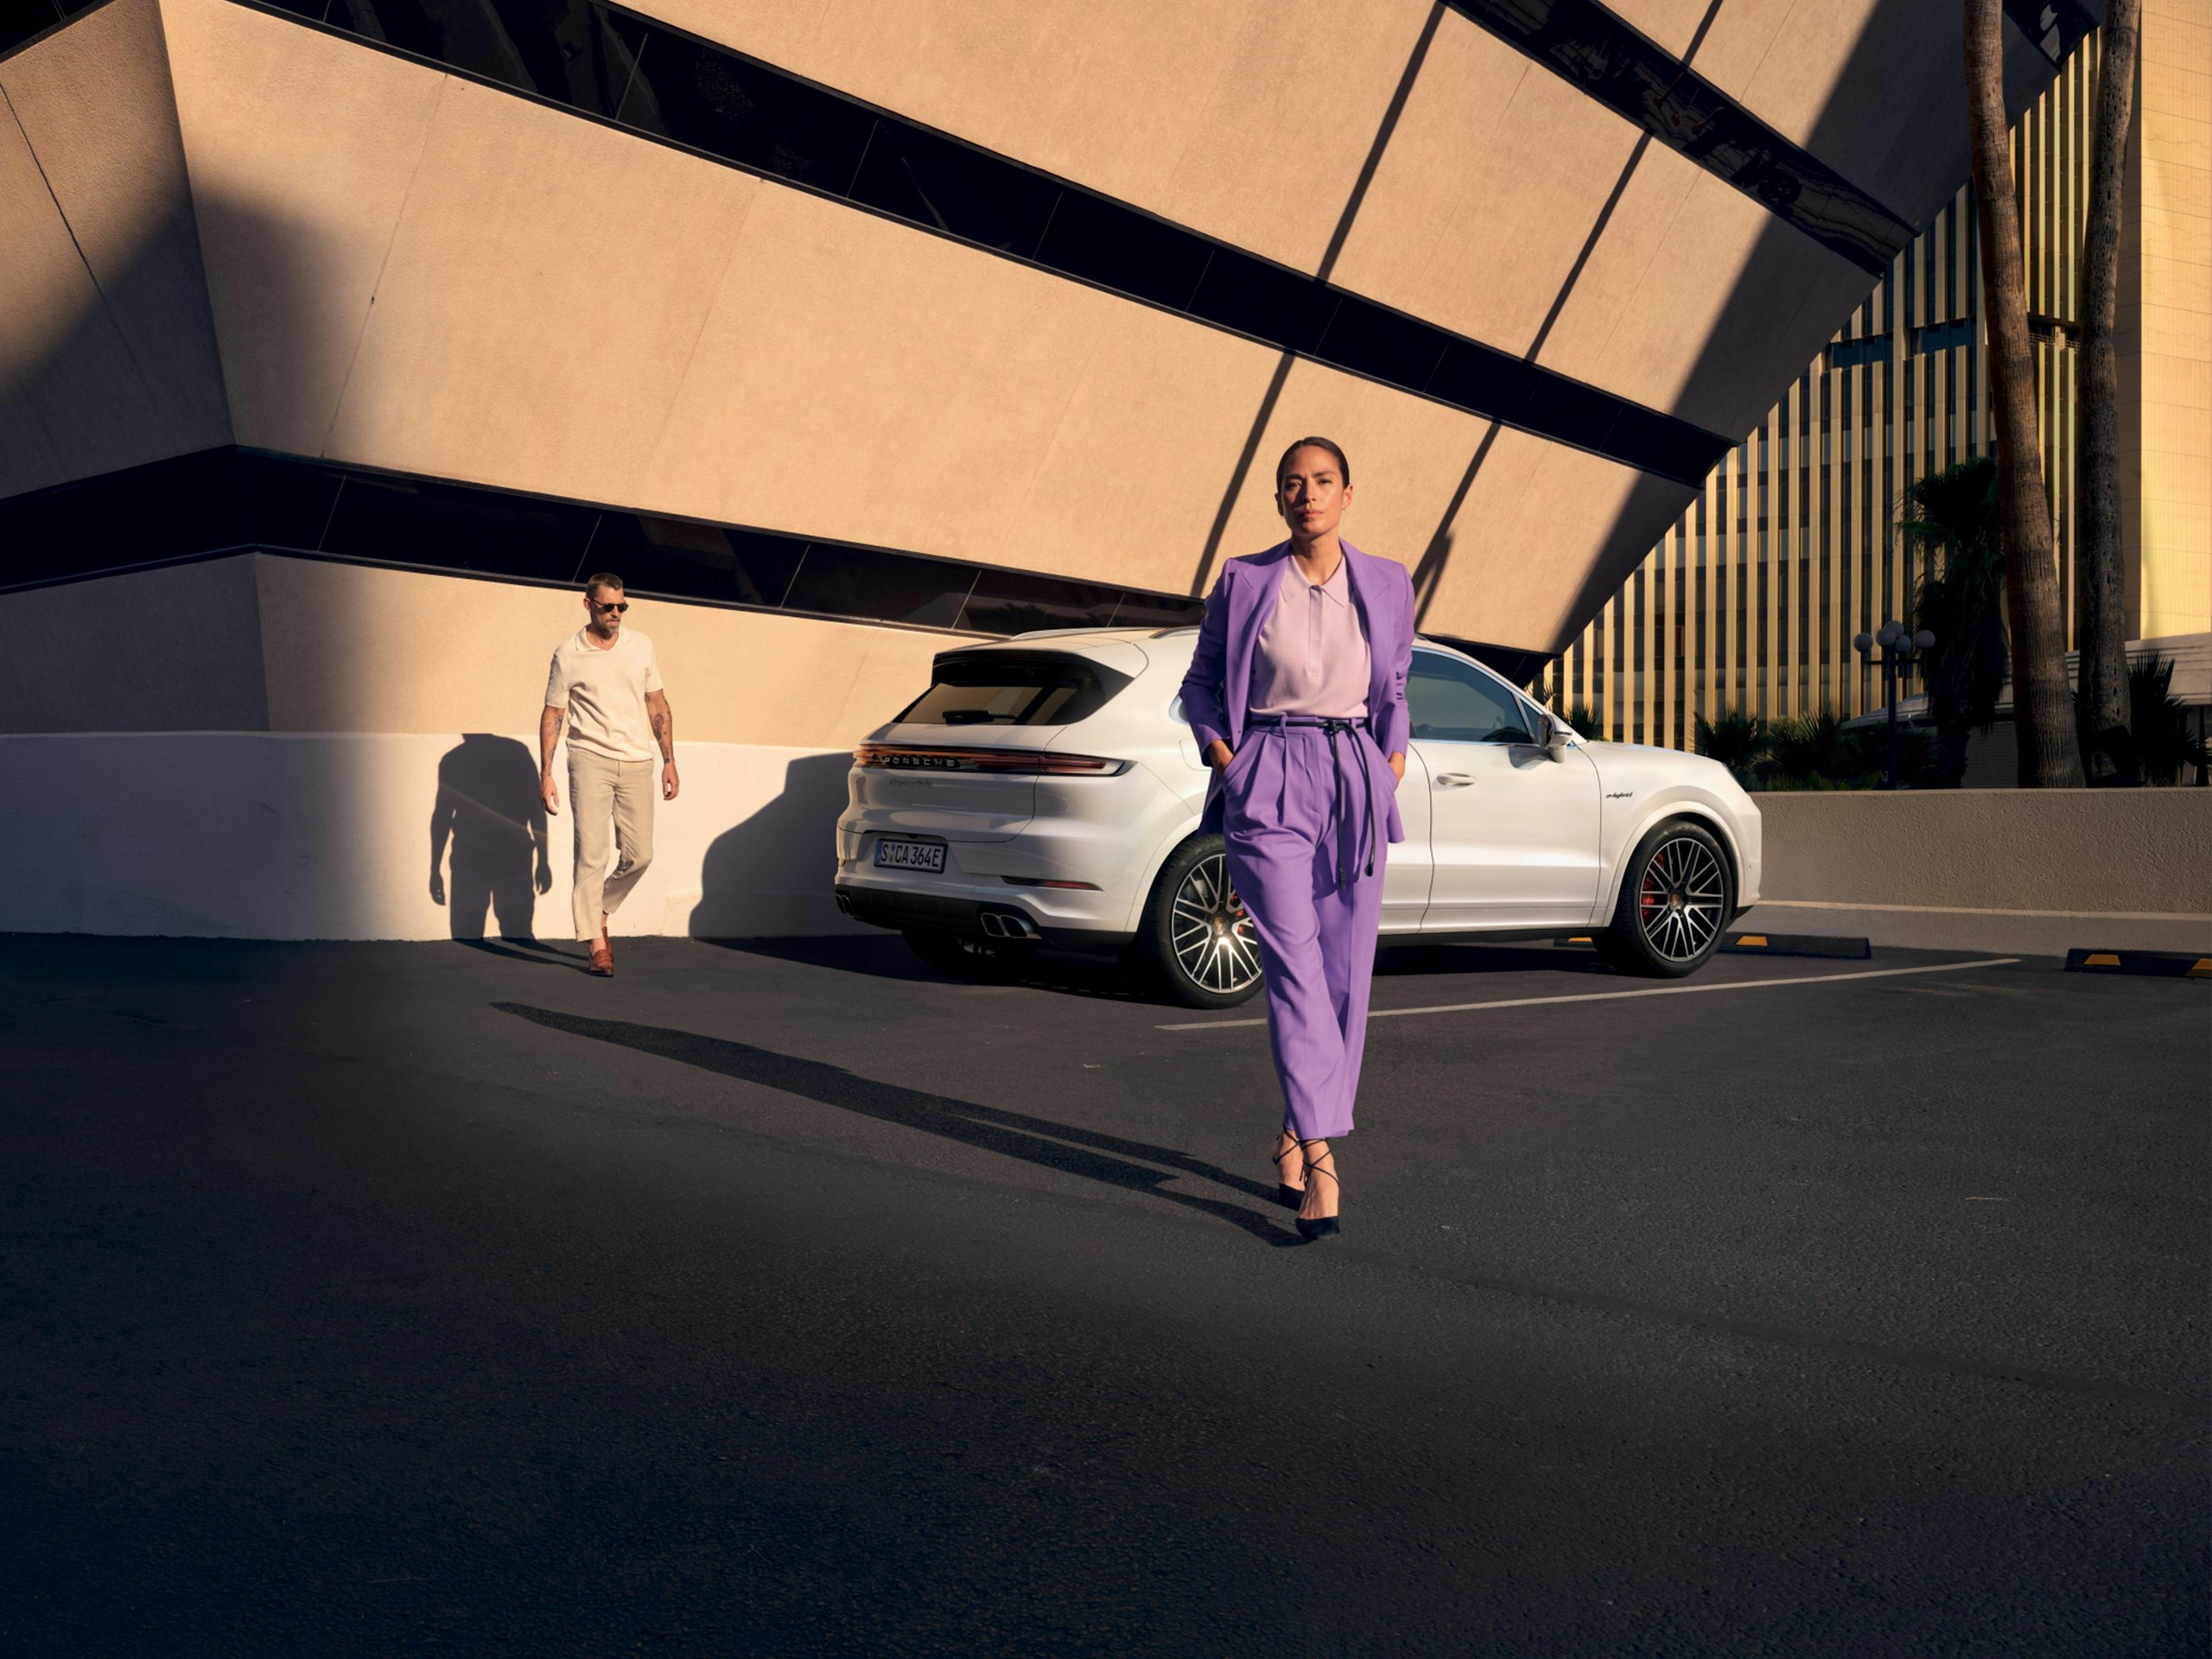 Rear shot of a white Cayenne Turbo E-Hybrid standing nect to a modern building at sunset with two young people in the foreground